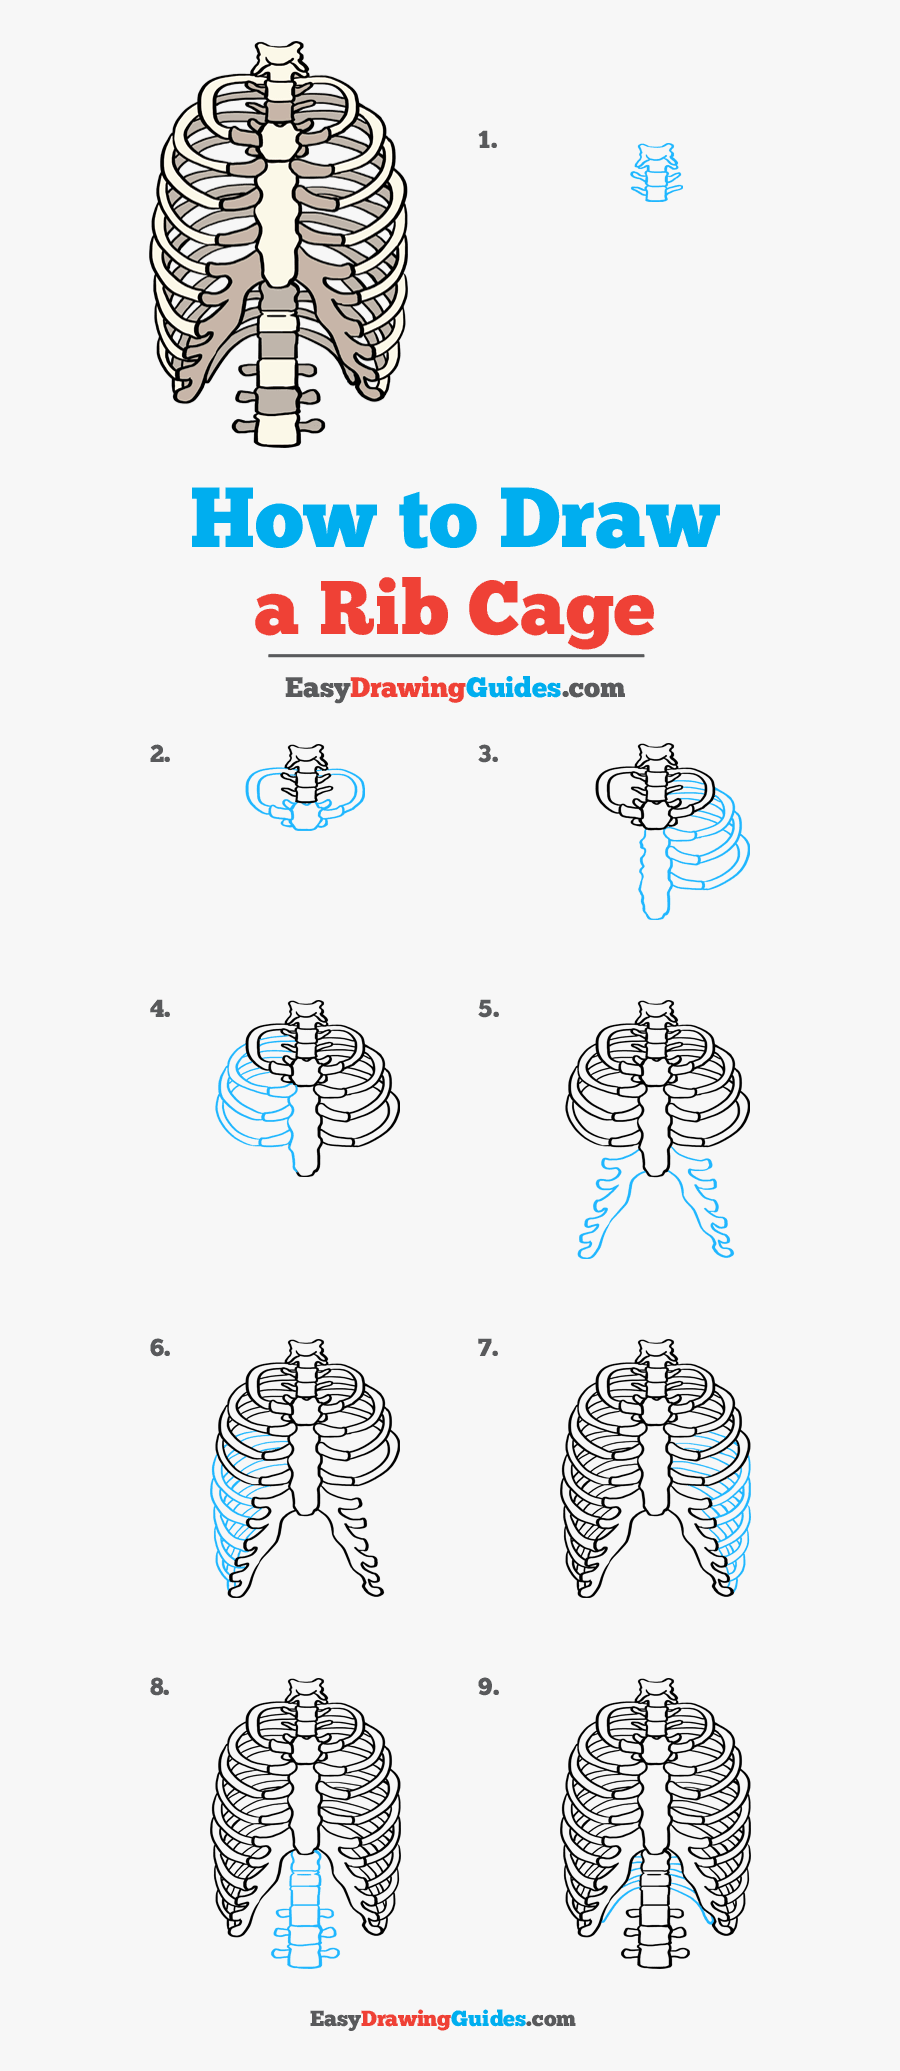 How To Draw Rib Cage - Draw Rib Cage, Transparent Clipart